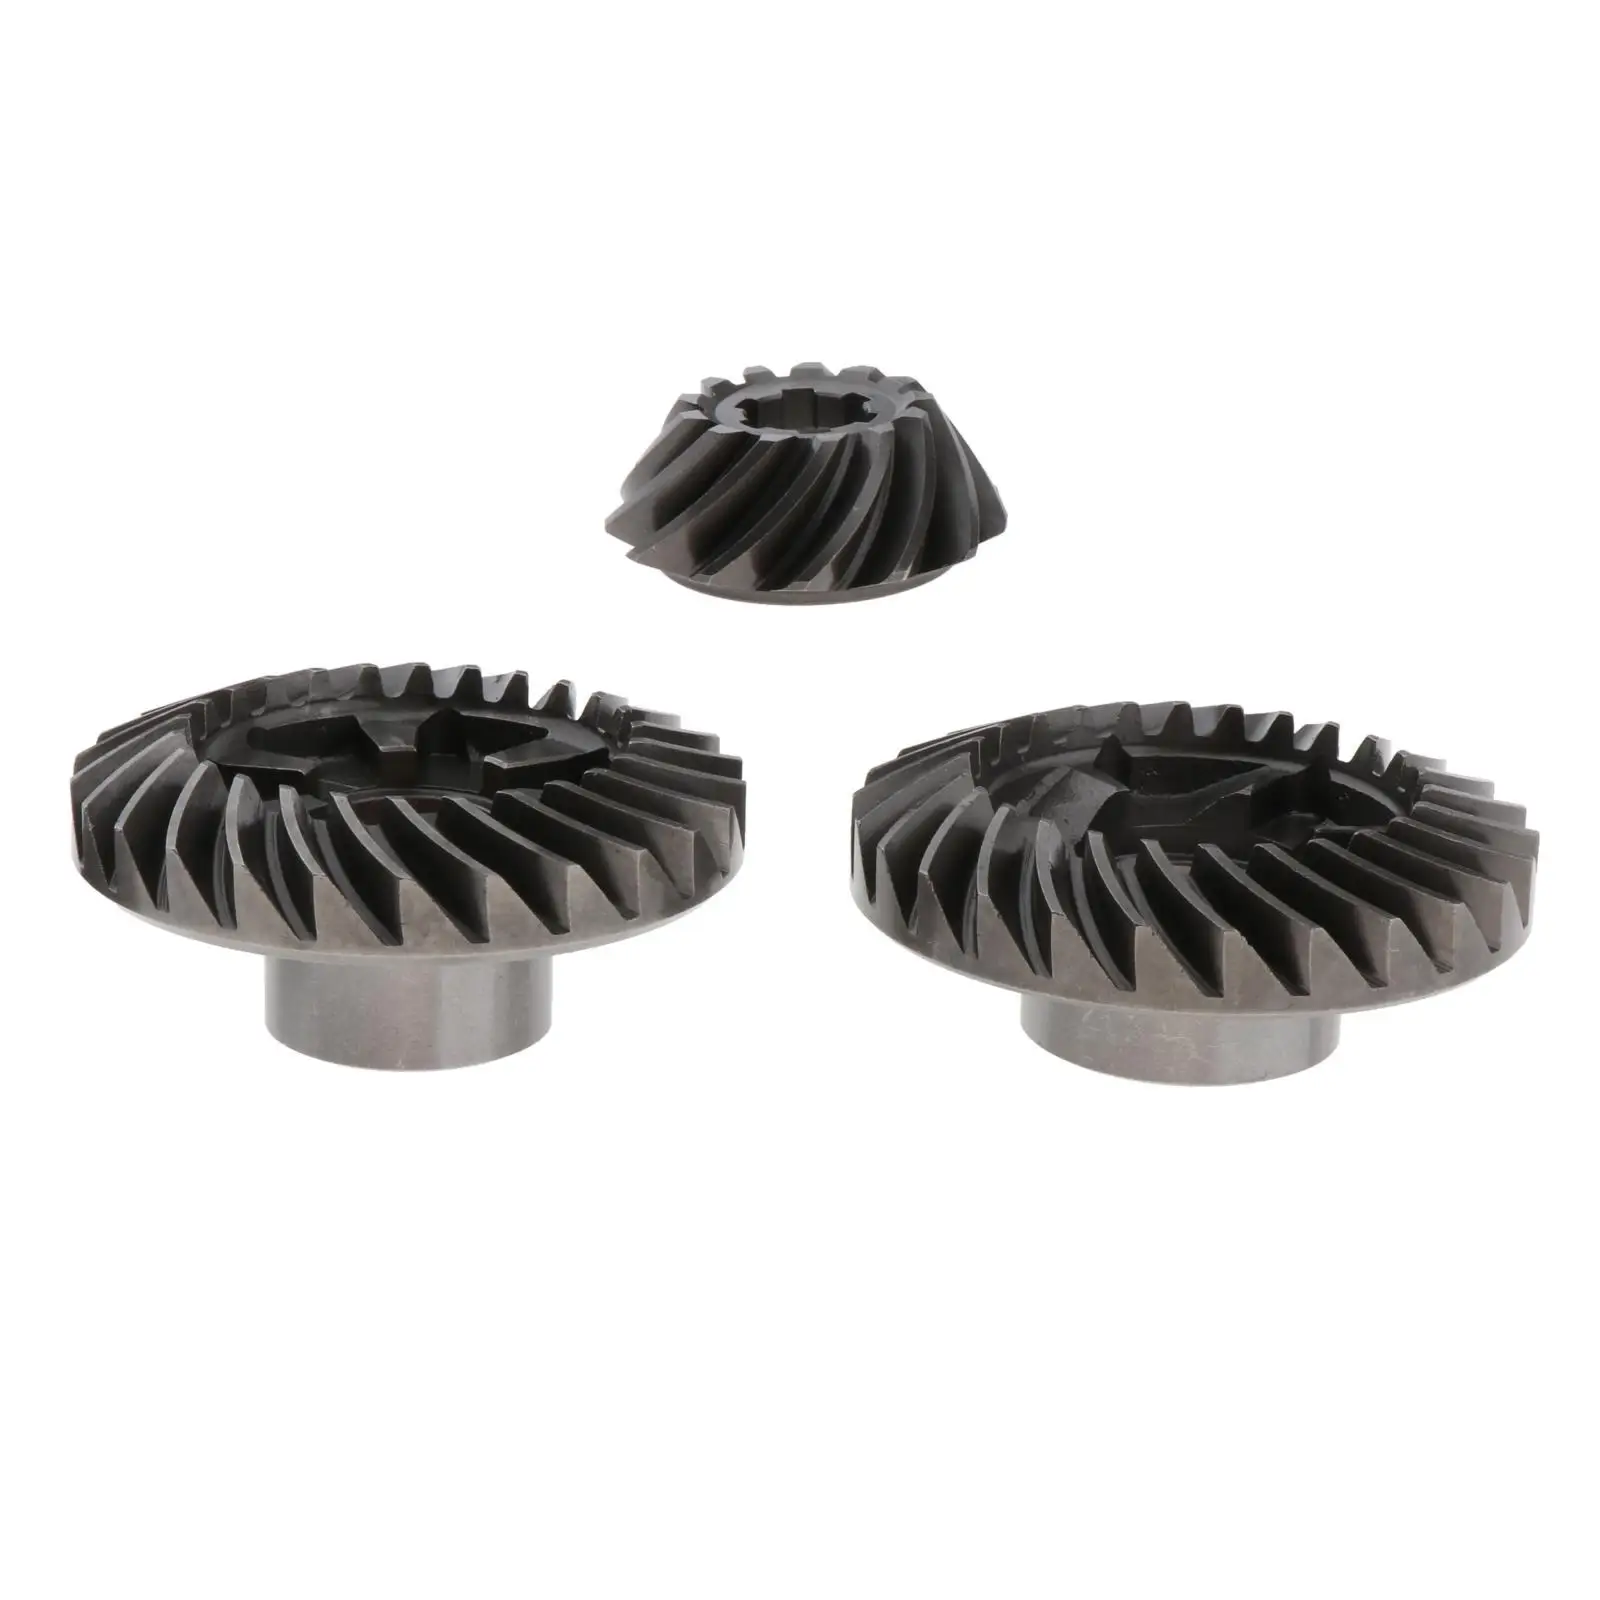 3 Gear Kits Forward Pinion Replacement Fit for  40HP